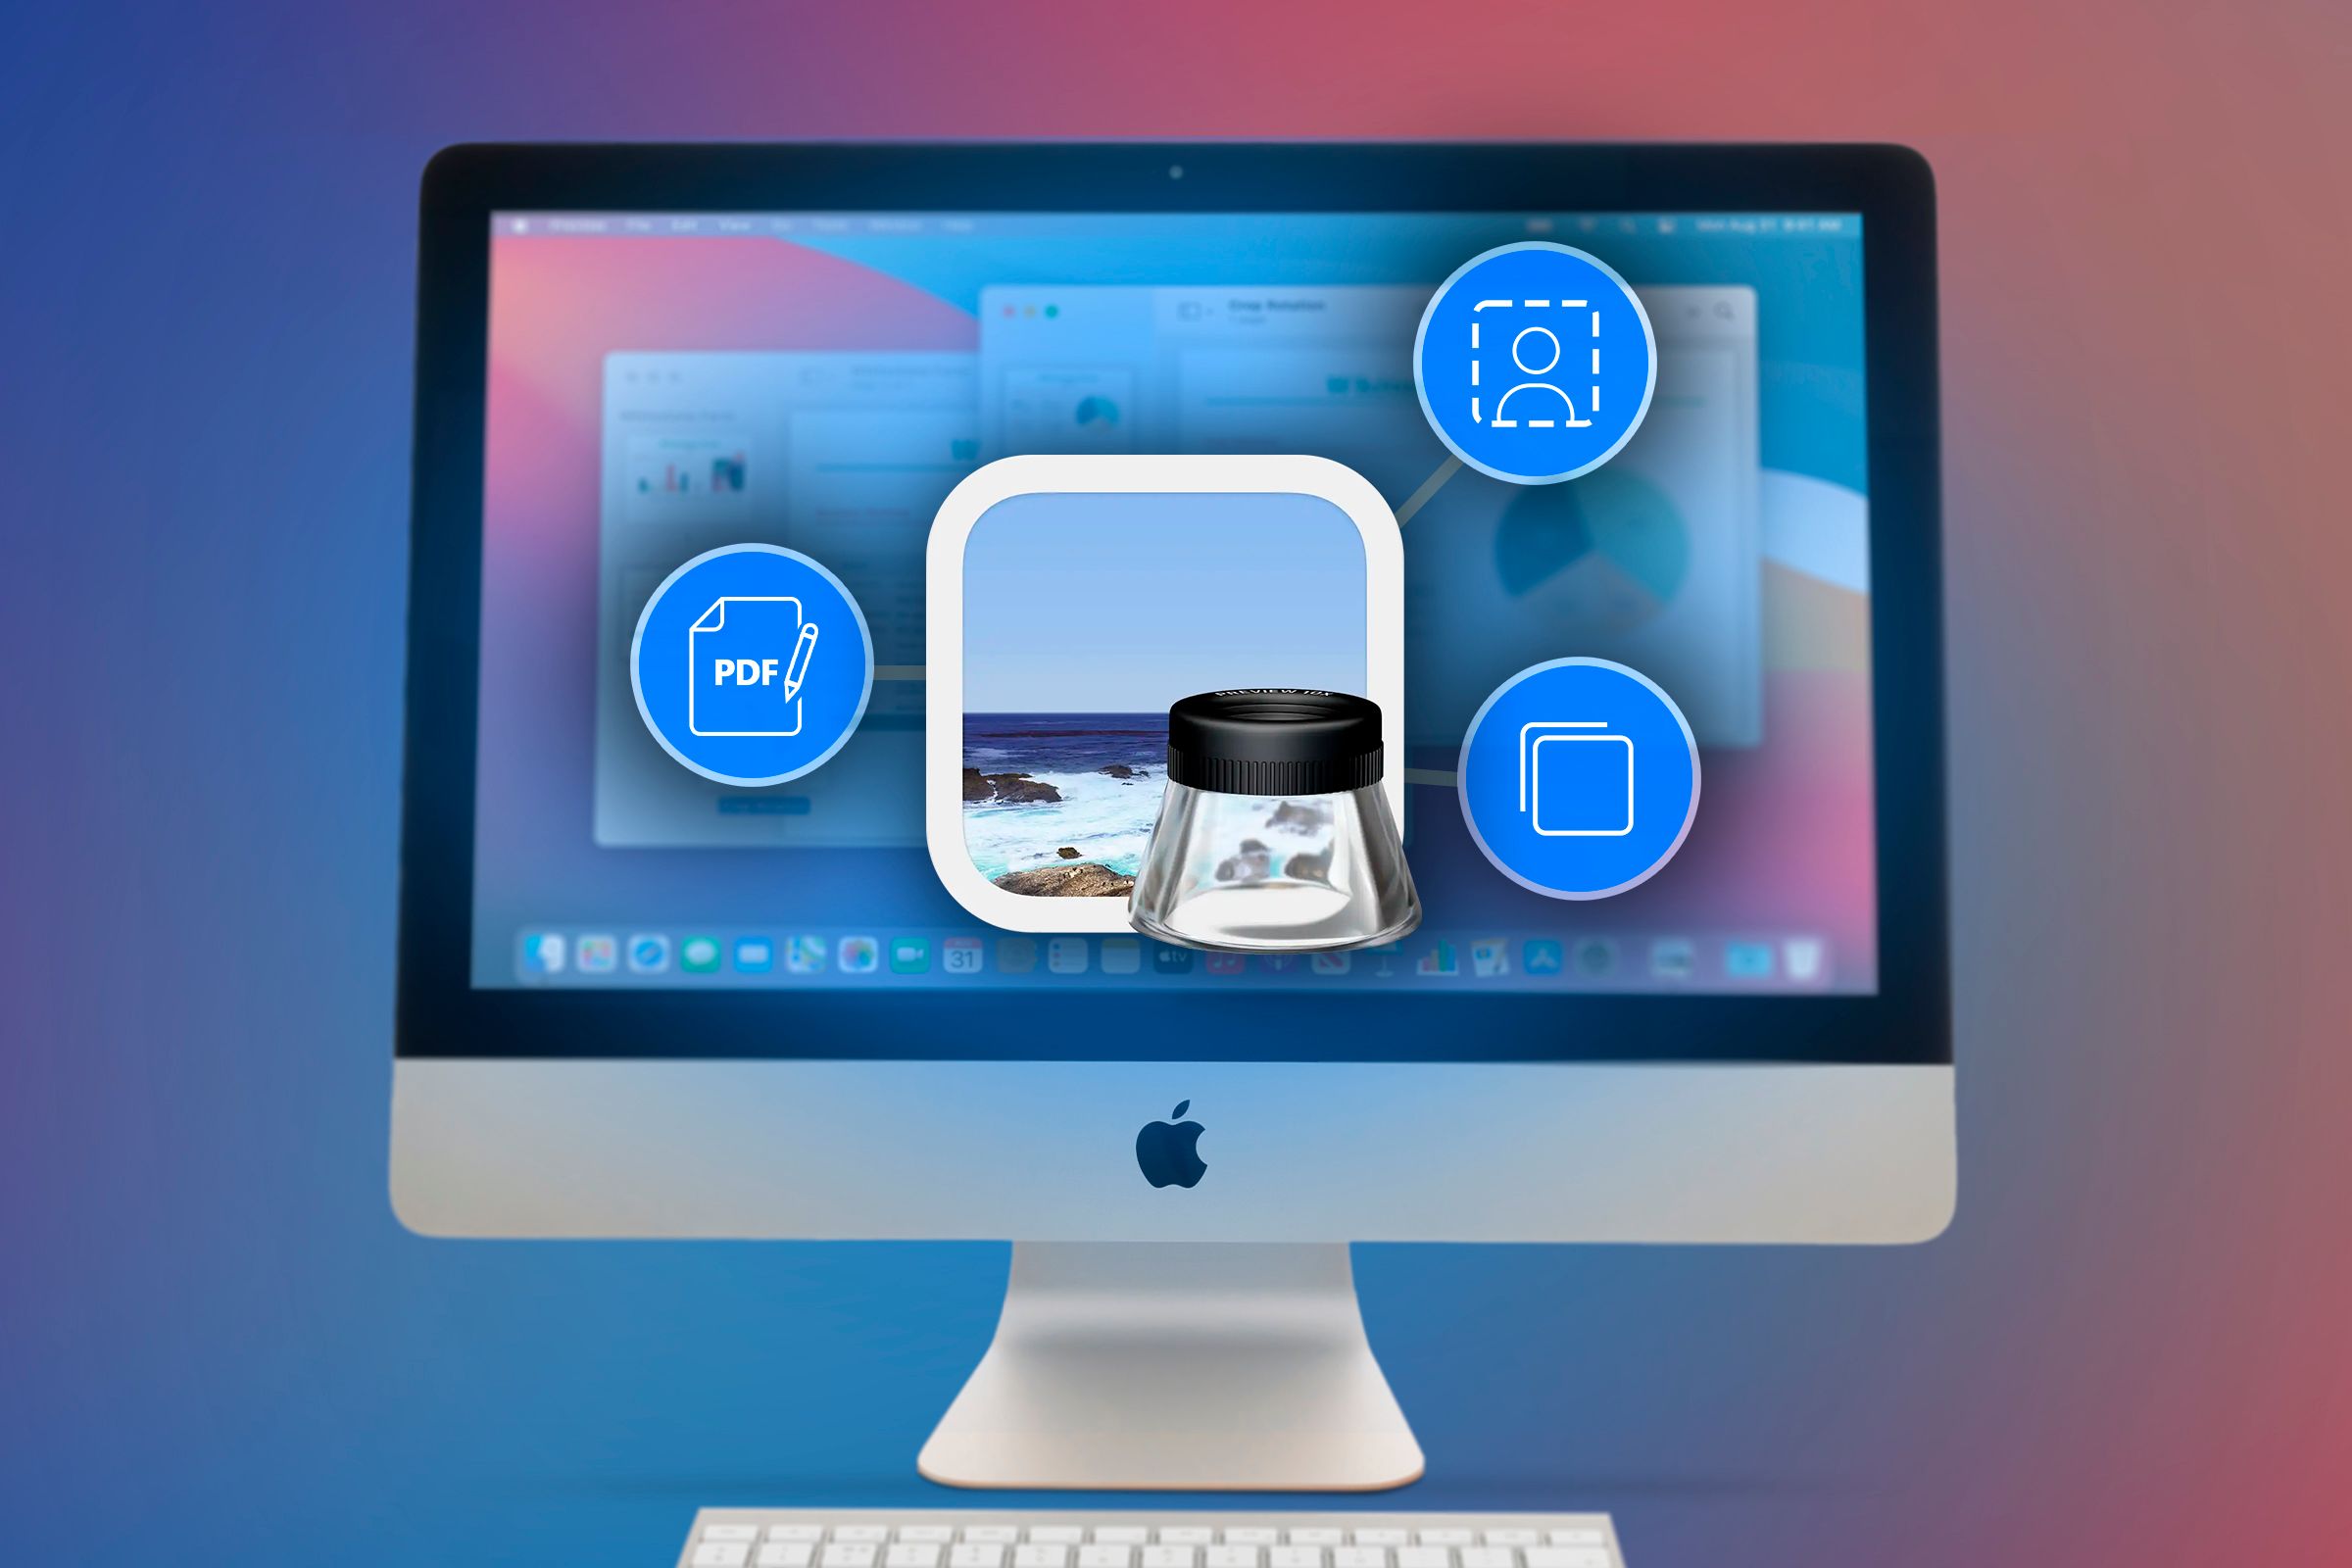 An iMac with the Preview app logo in the center of the screen and icons illustrating some of its functions.